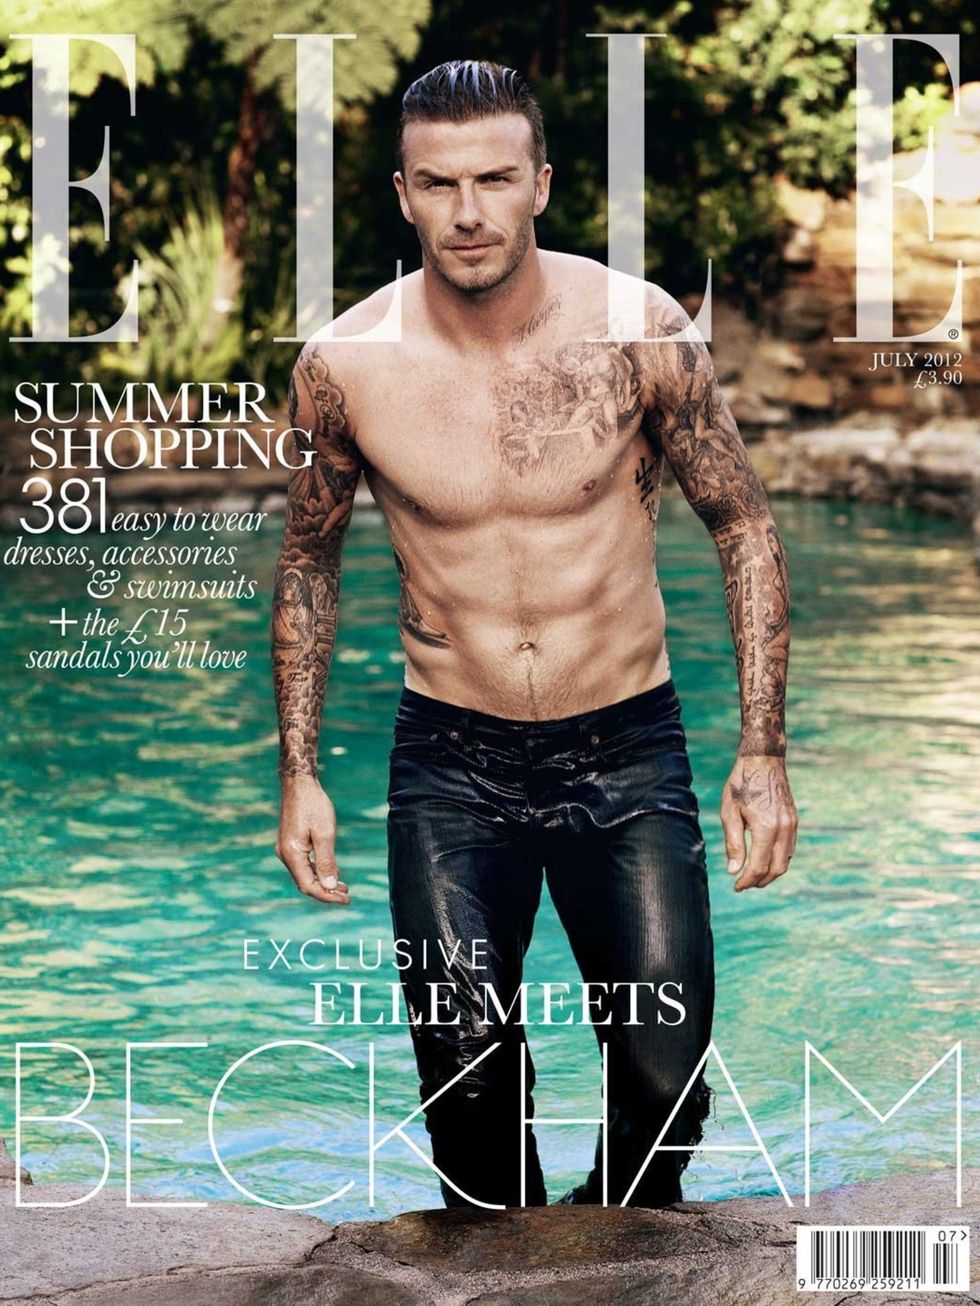 <p>David Beckham on the July 2012 cover</p>